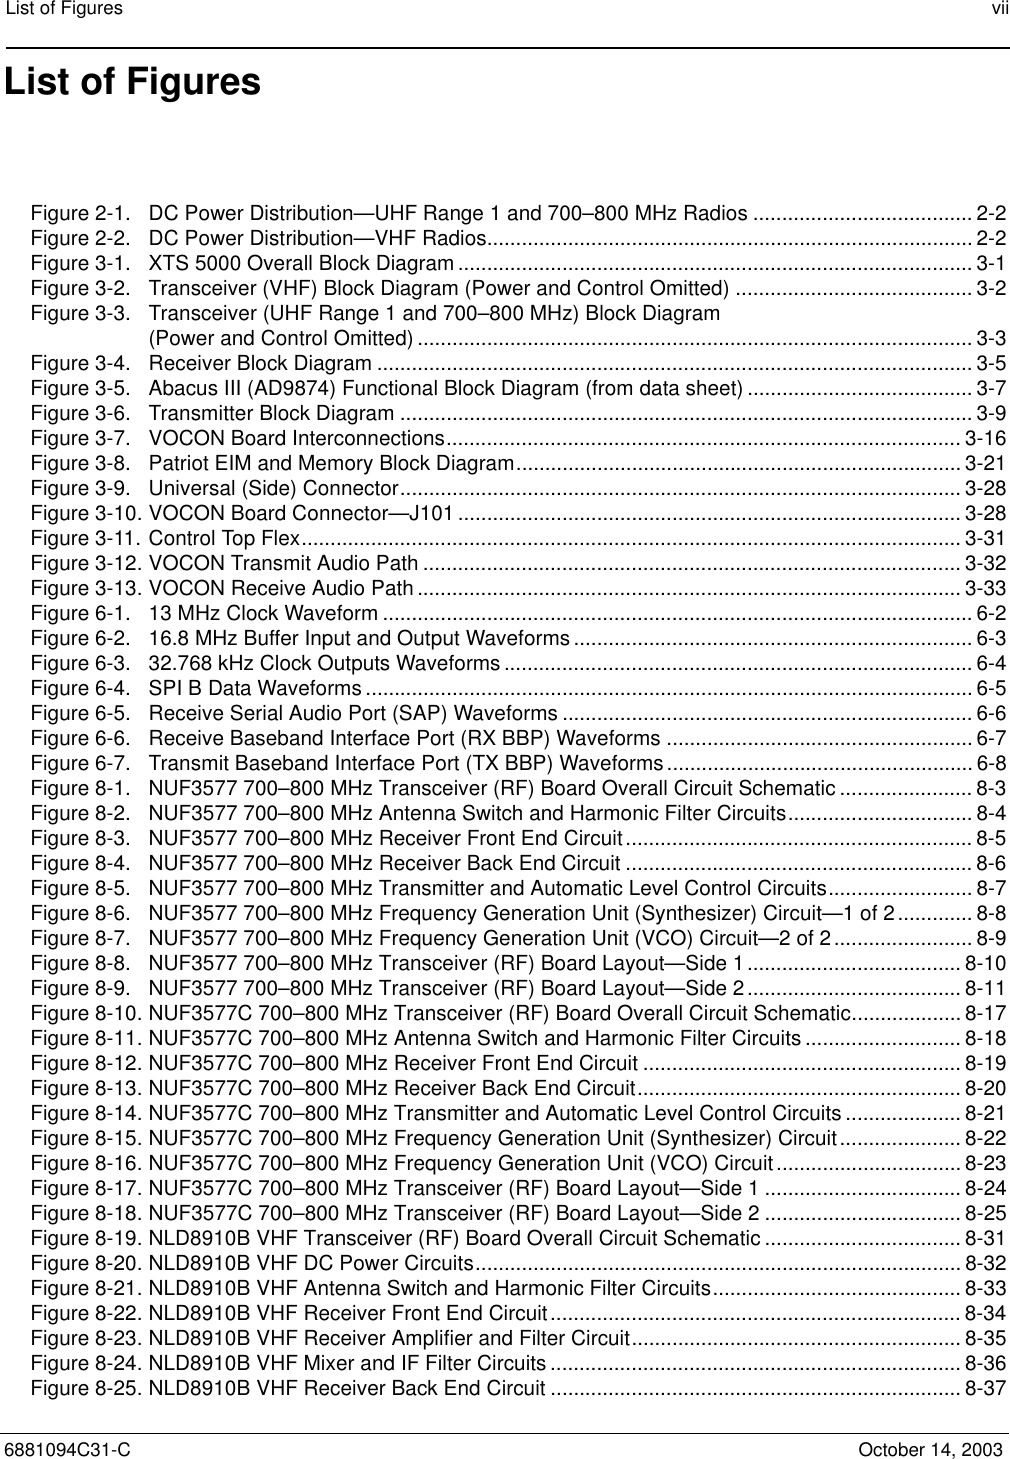 List of Figures vii6881094C31-C October 14, 2003List of FiguresFigure 2-1. DC Power Distribution—UHF Range 1 and 700–800 MHz Radios ...................................... 2-2Figure 2-2. DC Power Distribution—VHF Radios.................................................................................... 2-2Figure 3-1. XTS 5000 Overall Block Diagram ......................................................................................... 3-1Figure 3-2. Transceiver (VHF) Block Diagram (Power and Control Omitted) ......................................... 3-2Figure 3-3. Transceiver (UHF Range 1 and 700–800 MHz) Block Diagram (Power and Control Omitted) ................................................................................................ 3-3Figure 3-4. Receiver Block Diagram ....................................................................................................... 3-5Figure 3-5. Abacus III (AD9874) Functional Block Diagram (from data sheet) ....................................... 3-7Figure 3-6. Transmitter Block Diagram ................................................................................................... 3-9Figure 3-7. VOCON Board Interconnections.........................................................................................3-16Figure 3-8. Patriot EIM and Memory Block Diagram............................................................................. 3-21Figure 3-9. Universal (Side) Connector................................................................................................. 3-28Figure 3-10. VOCON Board Connector—J101 ....................................................................................... 3-28Figure 3-11. Control Top Flex.................................................................................................................. 3-31Figure 3-12. VOCON Transmit Audio Path ............................................................................................. 3-32Figure 3-13. VOCON Receive Audio Path .............................................................................................. 3-33Figure 6-1. 13 MHz Clock Waveform ...................................................................................................... 6-2Figure 6-2. 16.8 MHz Buffer Input and Output Waveforms ..................................................................... 6-3Figure 6-3. 32.768 kHz Clock Outputs Waveforms ................................................................................. 6-4Figure 6-4. SPI B Data Waveforms ......................................................................................................... 6-5Figure 6-5. Receive Serial Audio Port (SAP) Waveforms ....................................................................... 6-6Figure 6-6. Receive Baseband Interface Port (RX BBP) Waveforms ..................................................... 6-7Figure 6-7. Transmit Baseband Interface Port (TX BBP) Waveforms ..................................................... 6-8Figure 8-1. NUF3577 700–800 MHz Transceiver (RF) Board Overall Circuit Schematic ....................... 8-3Figure 8-2. NUF3577 700–800 MHz Antenna Switch and Harmonic Filter Circuits................................ 8-4Figure 8-3. NUF3577 700–800 MHz Receiver Front End Circuit............................................................ 8-5Figure 8-4. NUF3577 700–800 MHz Receiver Back End Circuit ............................................................ 8-6Figure 8-5. NUF3577 700–800 MHz Transmitter and Automatic Level Control Circuits......................... 8-7Figure 8-6. NUF3577 700–800 MHz Frequency Generation Unit (Synthesizer) Circuit—1 of 2............. 8-8Figure 8-7. NUF3577 700–800 MHz Frequency Generation Unit (VCO) Circuit—2 of 2........................ 8-9Figure 8-8. NUF3577 700–800 MHz Transceiver (RF) Board Layout—Side 1..................................... 8-10Figure 8-9. NUF3577 700–800 MHz Transceiver (RF) Board Layout—Side 2..................................... 8-11Figure 8-10. NUF3577C 700–800 MHz Transceiver (RF) Board Overall Circuit Schematic................... 8-17Figure 8-11. NUF3577C 700–800 MHz Antenna Switch and Harmonic Filter Circuits ........................... 8-18Figure 8-12. NUF3577C 700–800 MHz Receiver Front End Circuit ....................................................... 8-19Figure 8-13. NUF3577C 700–800 MHz Receiver Back End Circuit........................................................ 8-20Figure 8-14. NUF3577C 700–800 MHz Transmitter and Automatic Level Control Circuits .................... 8-21Figure 8-15. NUF3577C 700–800 MHz Frequency Generation Unit (Synthesizer) Circuit..................... 8-22Figure 8-16. NUF3577C 700–800 MHz Frequency Generation Unit (VCO) Circuit................................ 8-23Figure 8-17. NUF3577C 700–800 MHz Transceiver (RF) Board Layout—Side 1 .................................. 8-24Figure 8-18. NUF3577C 700–800 MHz Transceiver (RF) Board Layout—Side 2 .................................. 8-25Figure 8-19. NLD8910B VHF Transceiver (RF) Board Overall Circuit Schematic .................................. 8-31Figure 8-20. NLD8910B VHF DC Power Circuits.................................................................................... 8-32Figure 8-21. NLD8910B VHF Antenna Switch and Harmonic Filter Circuits........................................... 8-33Figure 8-22. NLD8910B VHF Receiver Front End Circuit....................................................................... 8-34Figure 8-23. NLD8910B VHF Receiver Amplifier and Filter Circuit......................................................... 8-35Figure 8-24. NLD8910B VHF Mixer and IF Filter Circuits ....................................................................... 8-36Figure 8-25. NLD8910B VHF Receiver Back End Circuit ....................................................................... 8-37